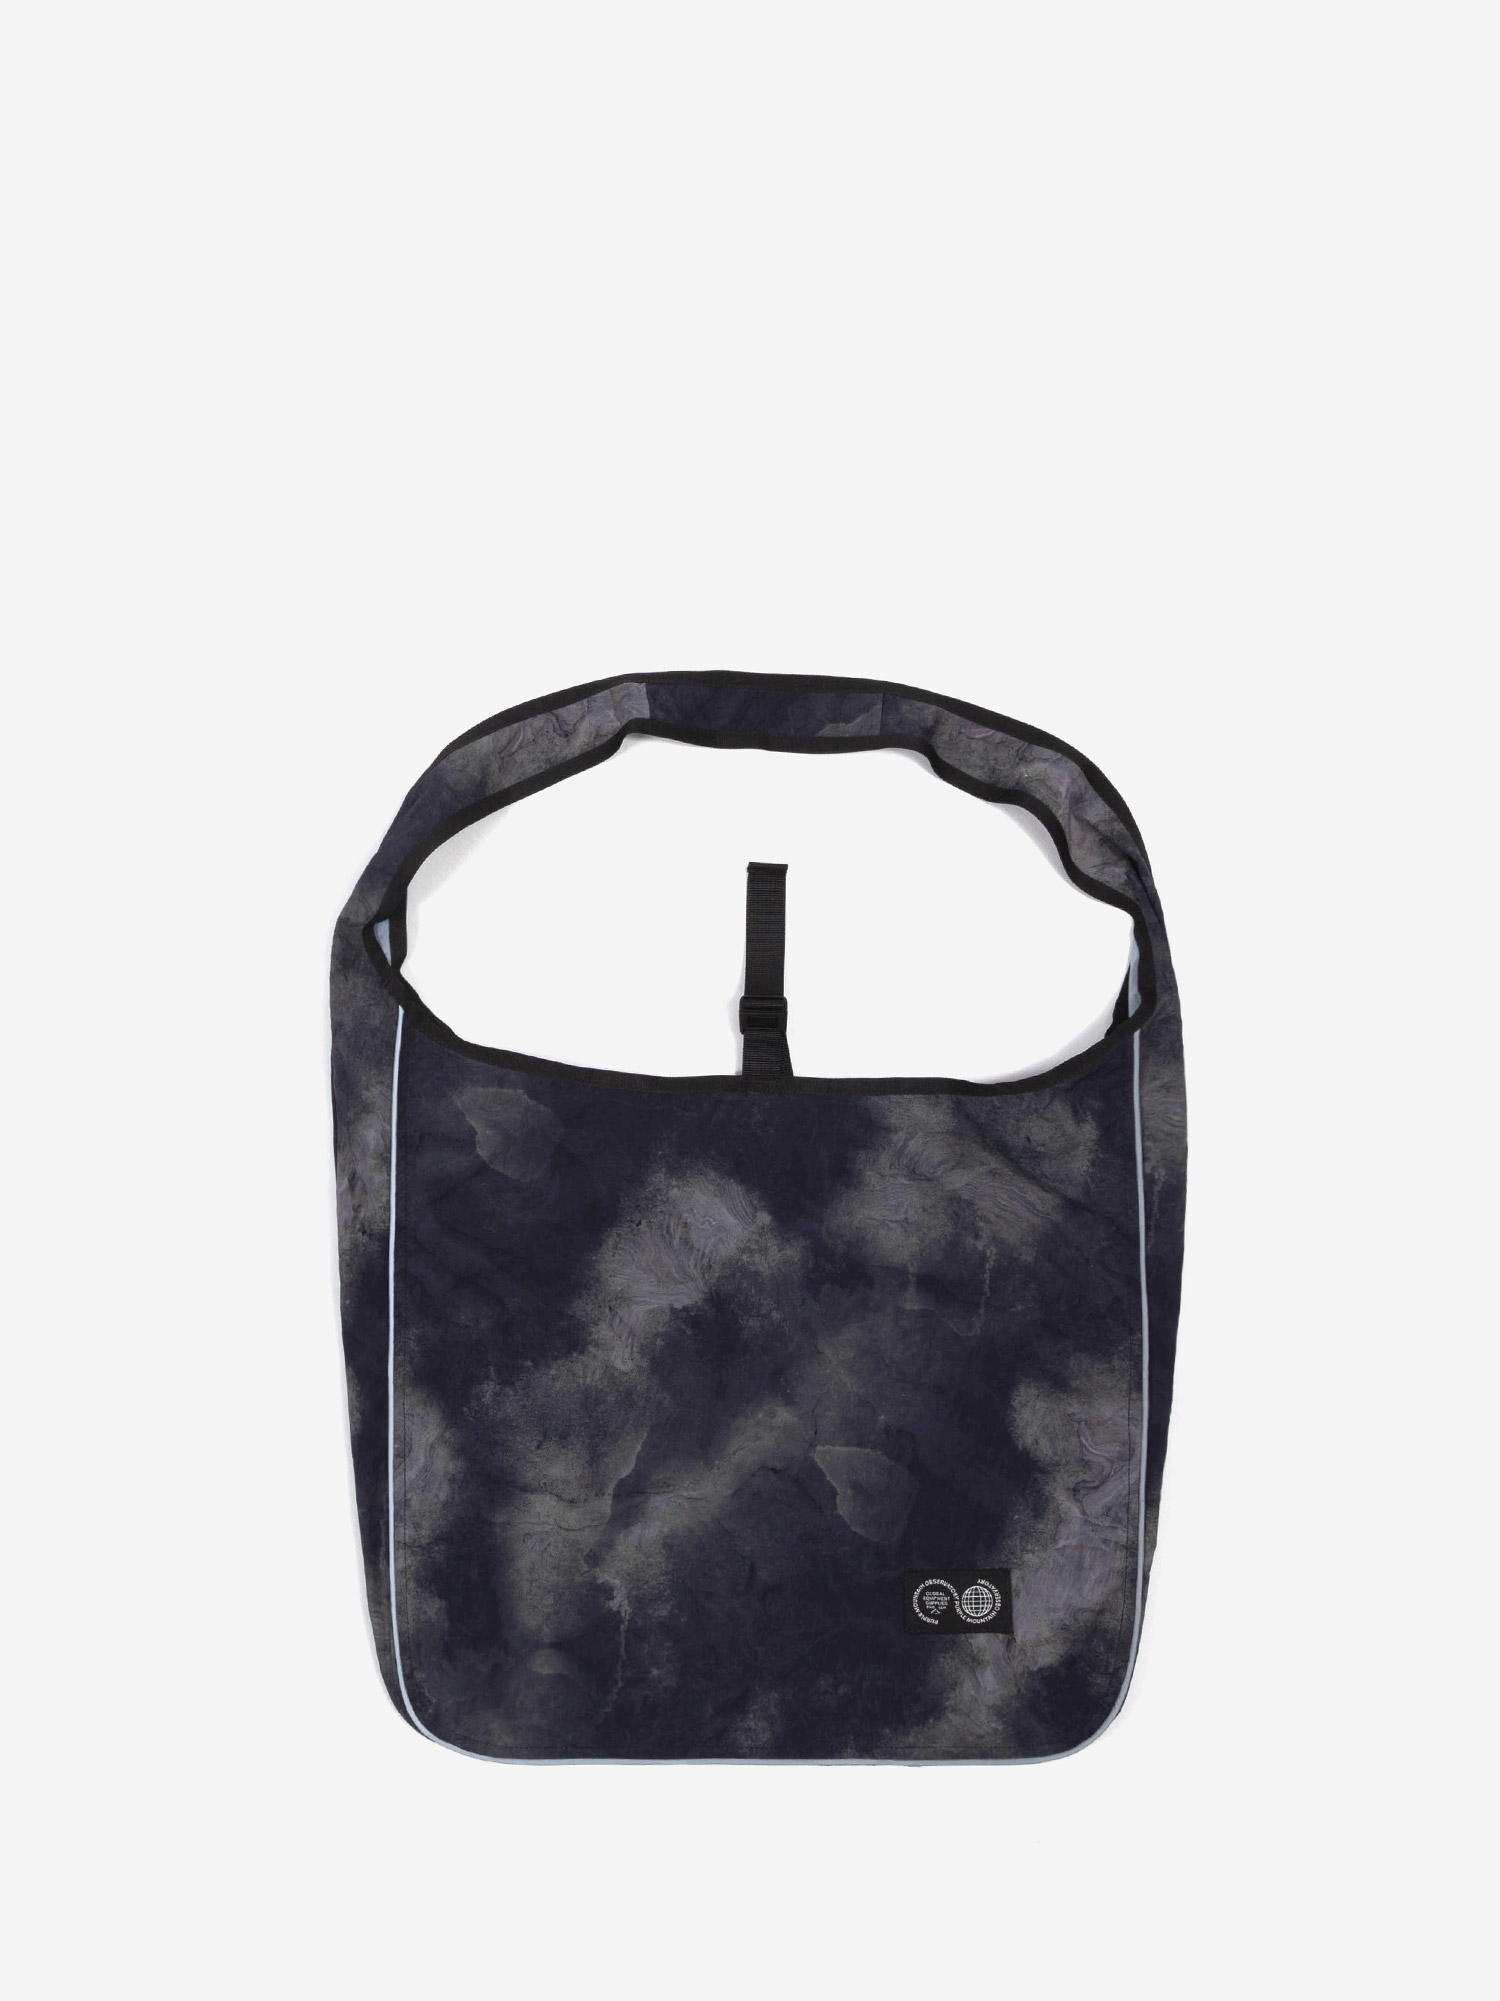 Featured image for “TEXTURE PRINT CAMPING TOTE BLACK”